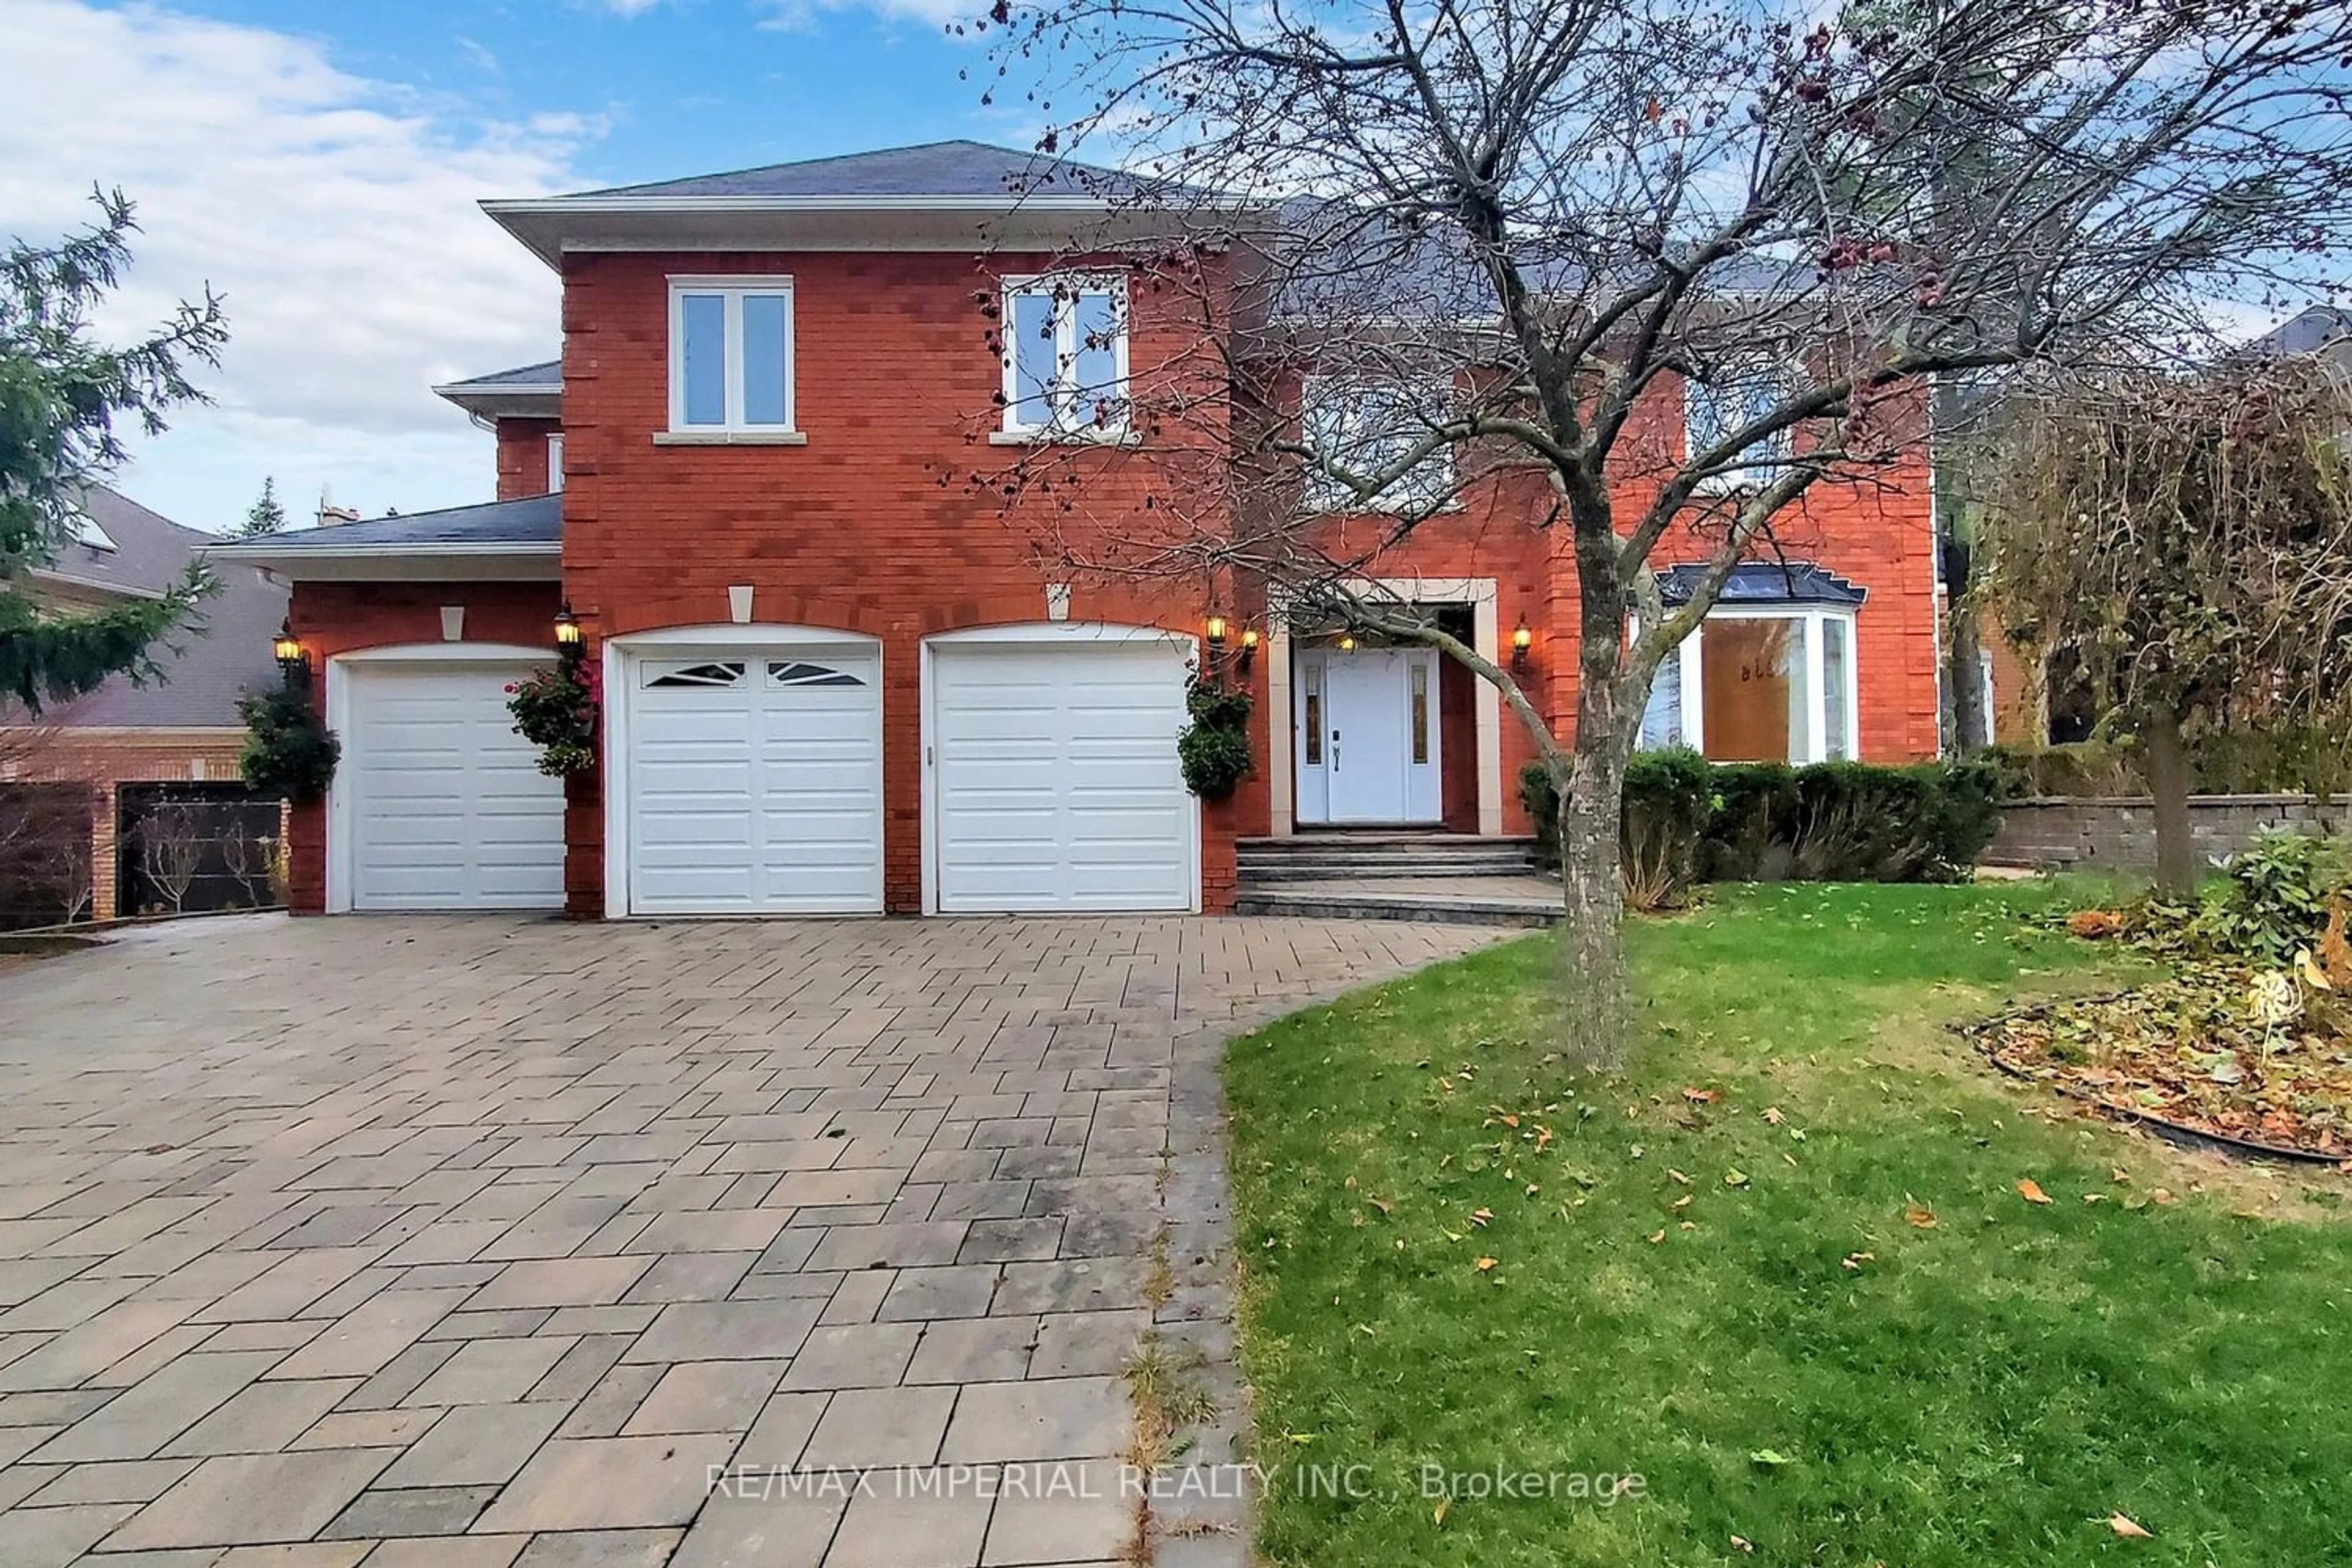 Home with brick exterior material for 29 Vesta Dr, Richmond Hill Ontario L4B 2M2